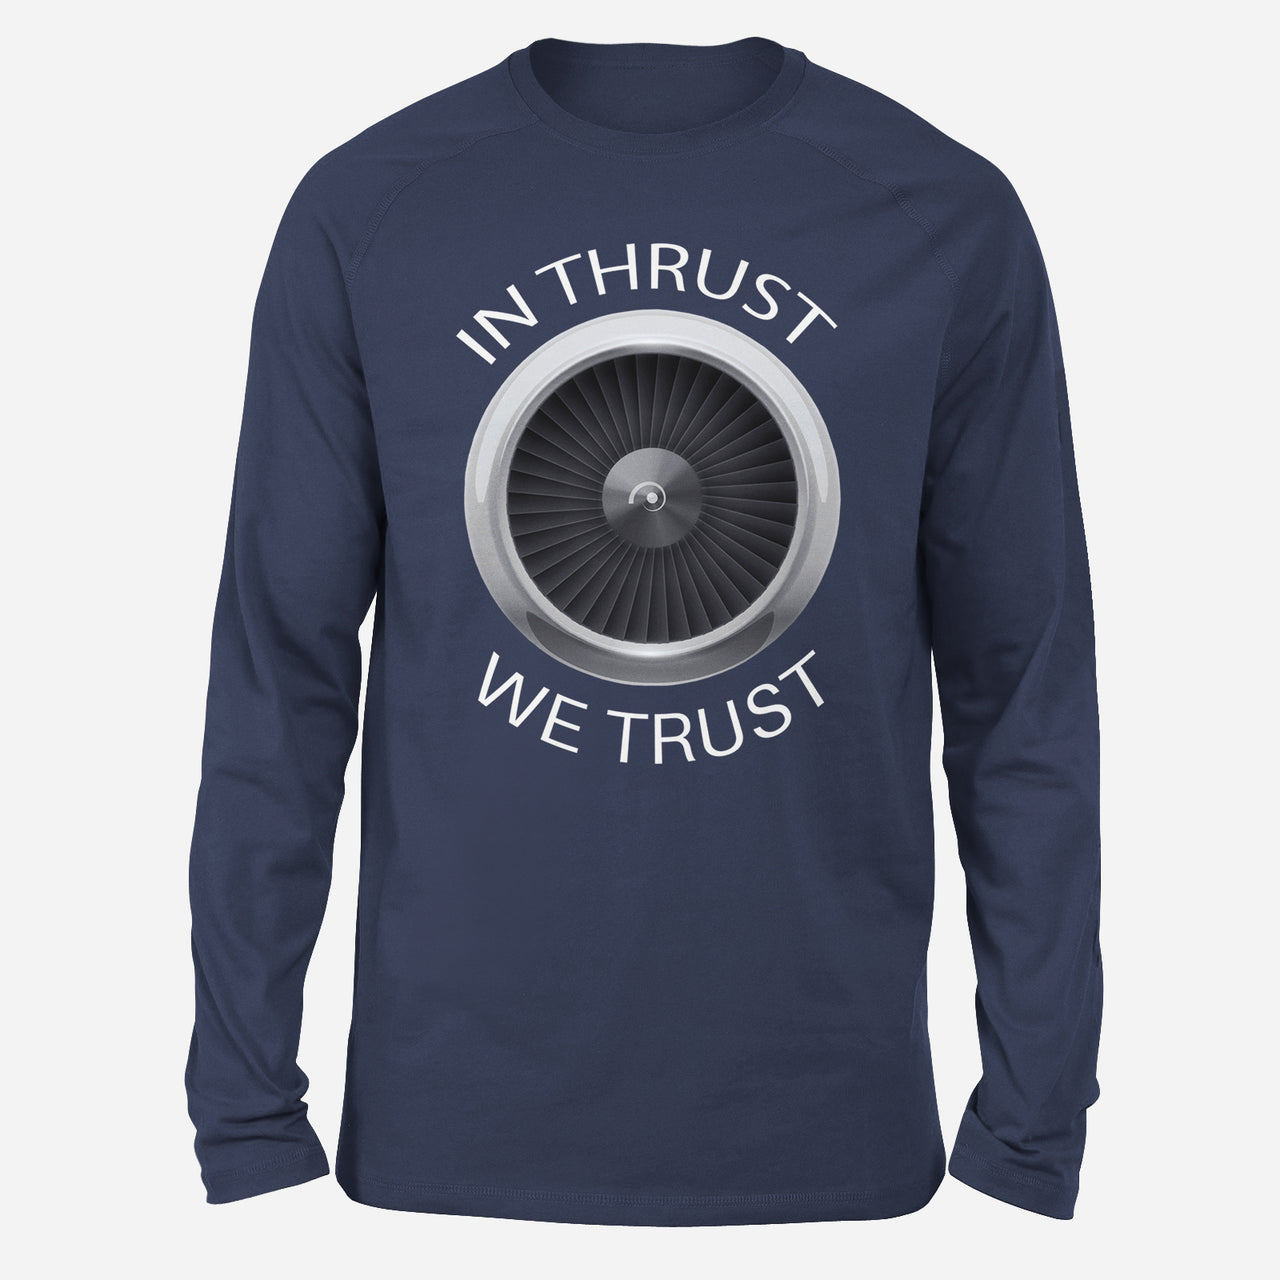 In Thrust We Trust Designed Long-Sleeve T-Shirts